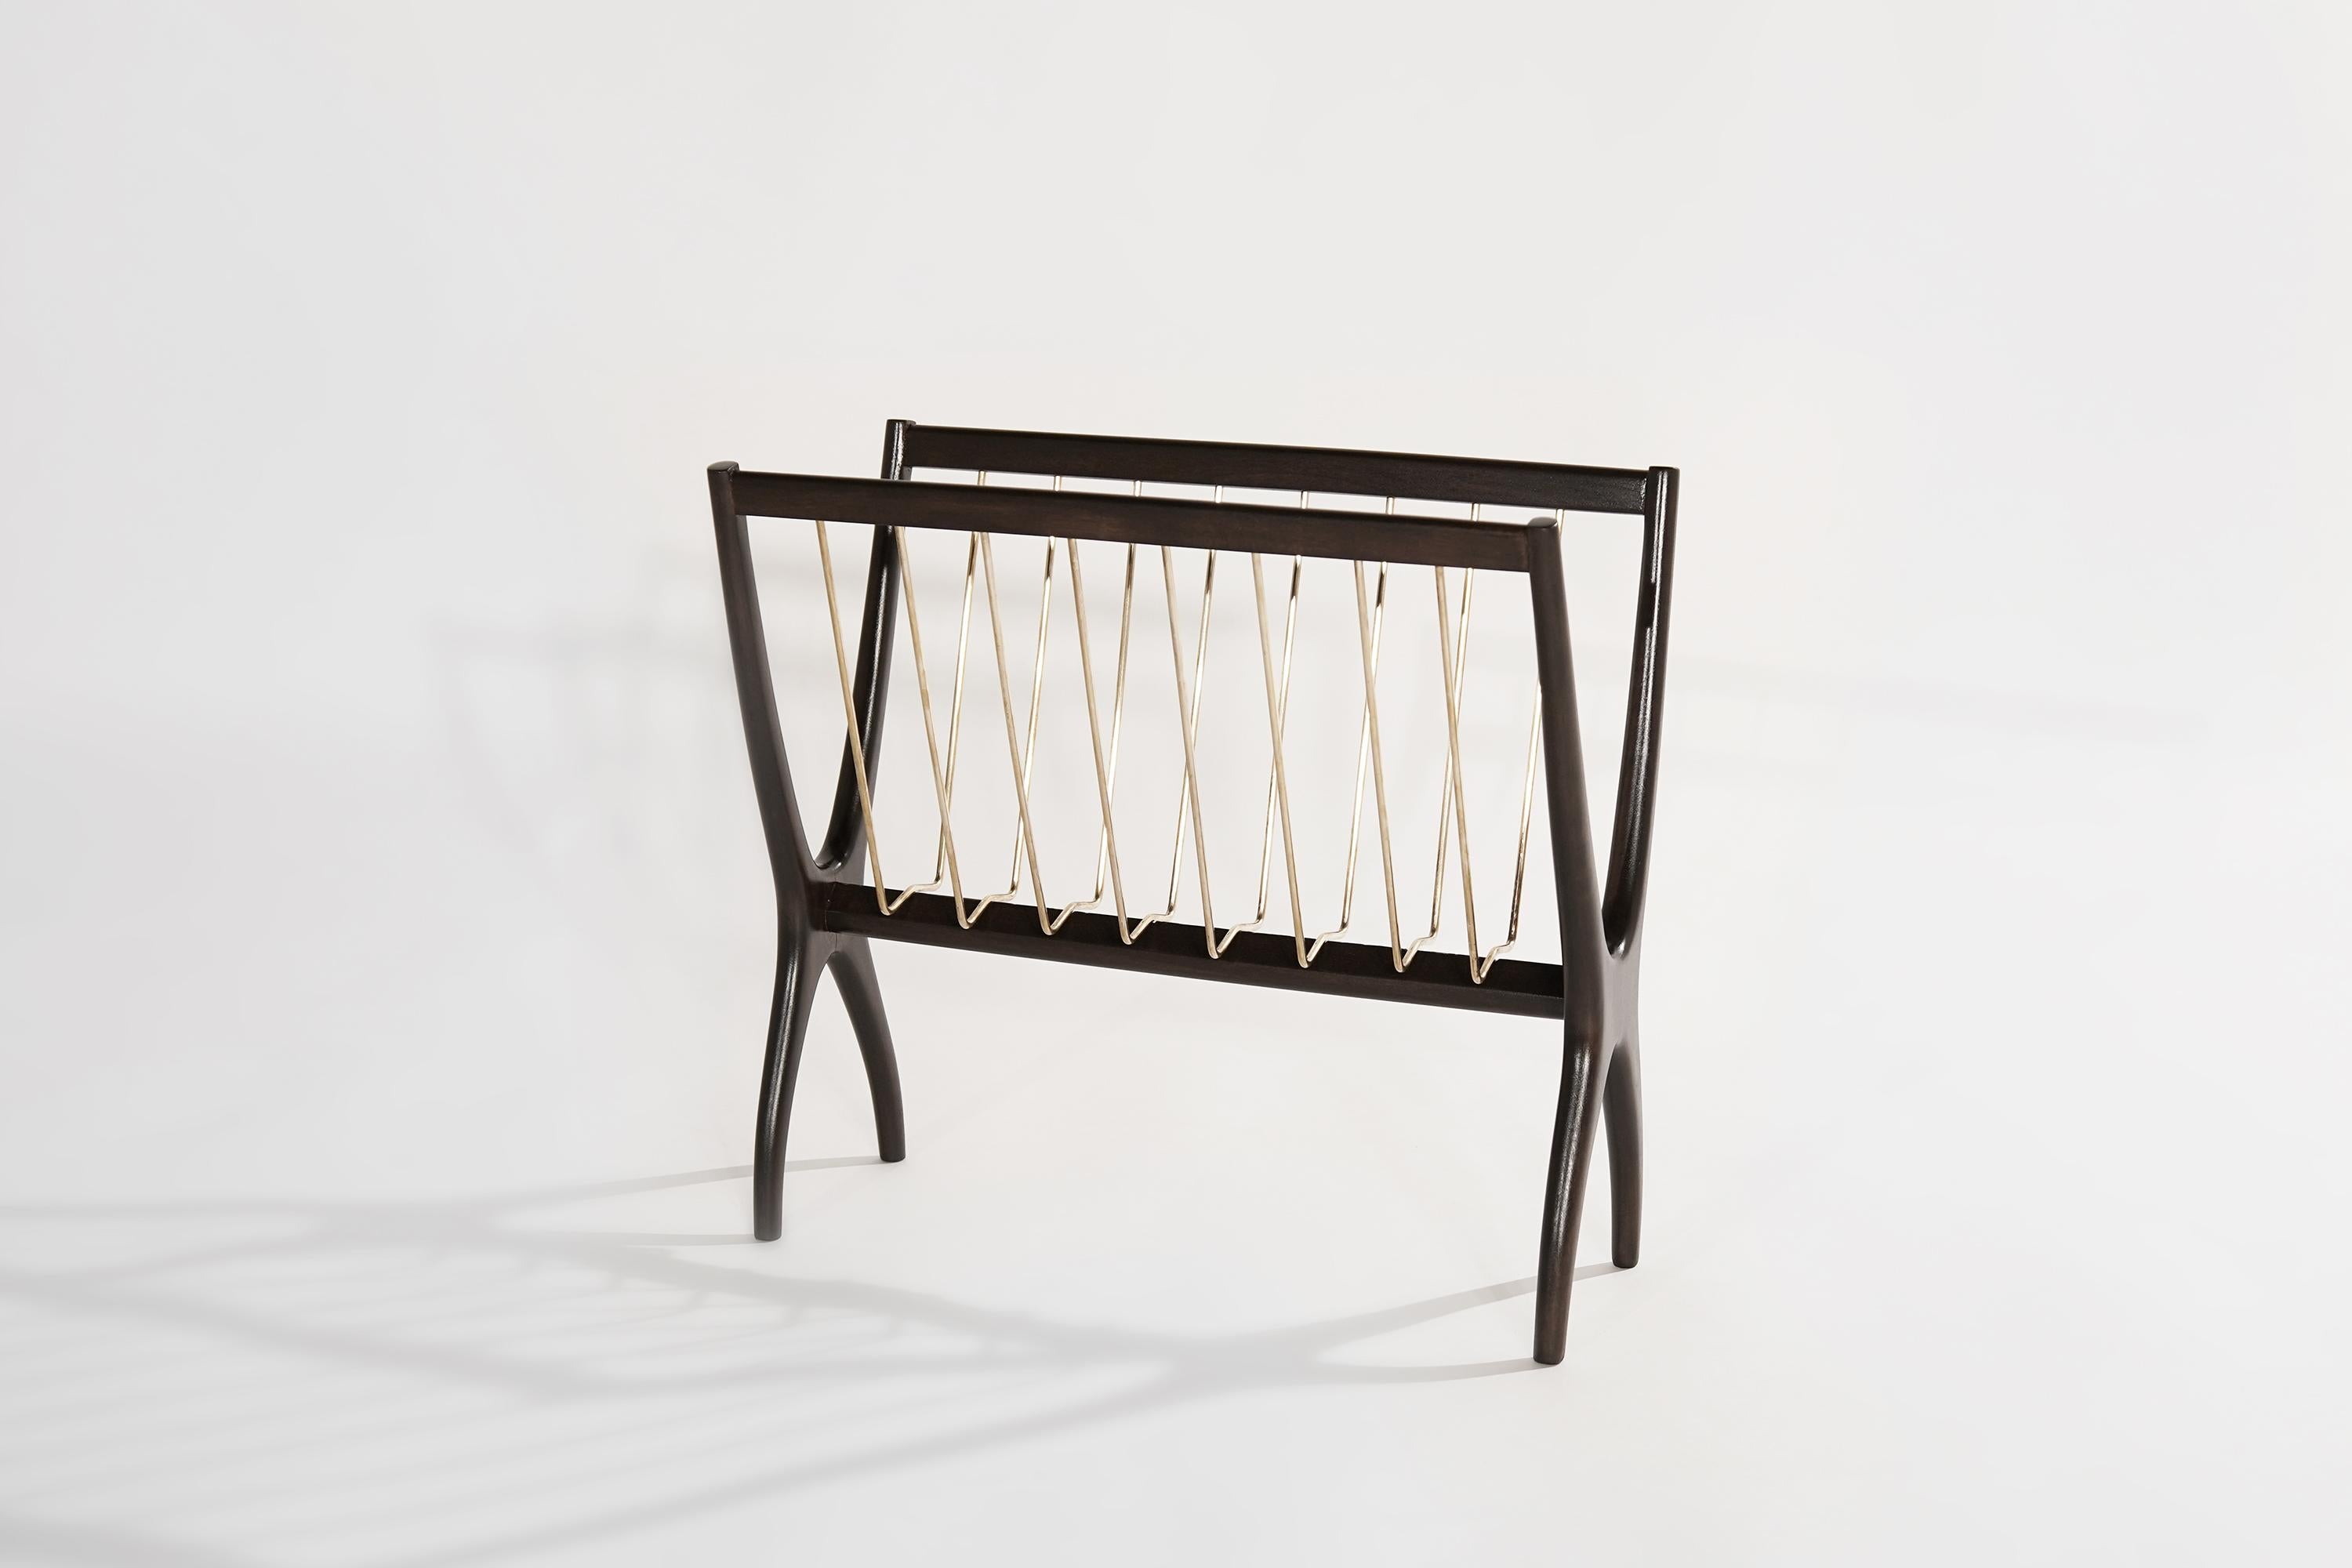 A fully restored magazine rack, original from Italy, circa 1950-1959.

Other designers working in the organic style include Carlo Mollino, Franco Campo & Carlo Graffi, Ico Parisi, and Jean Royère.